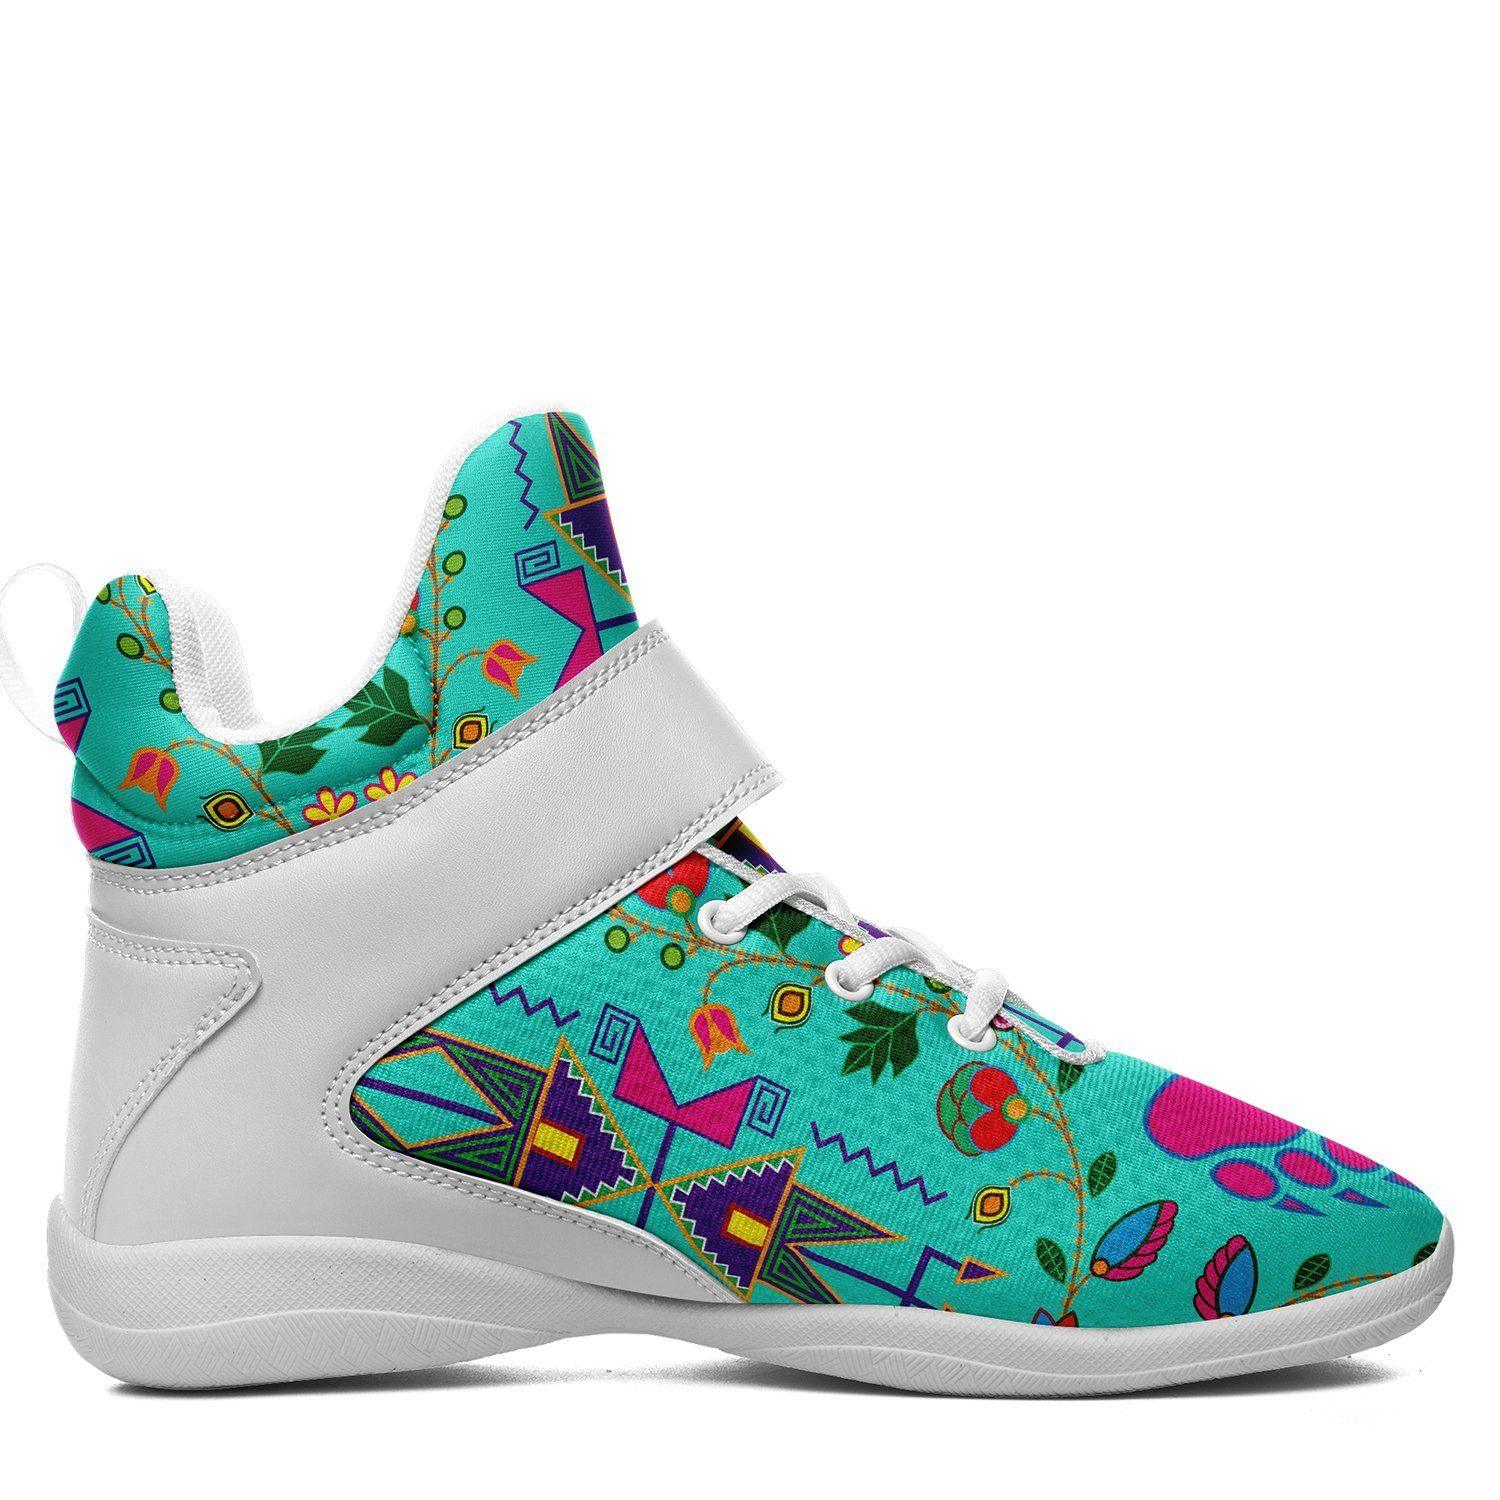 Geometric Floral Fall Sky Ipottaa Basketball / Sport High Top Shoes - White Sole 49 Dzine 